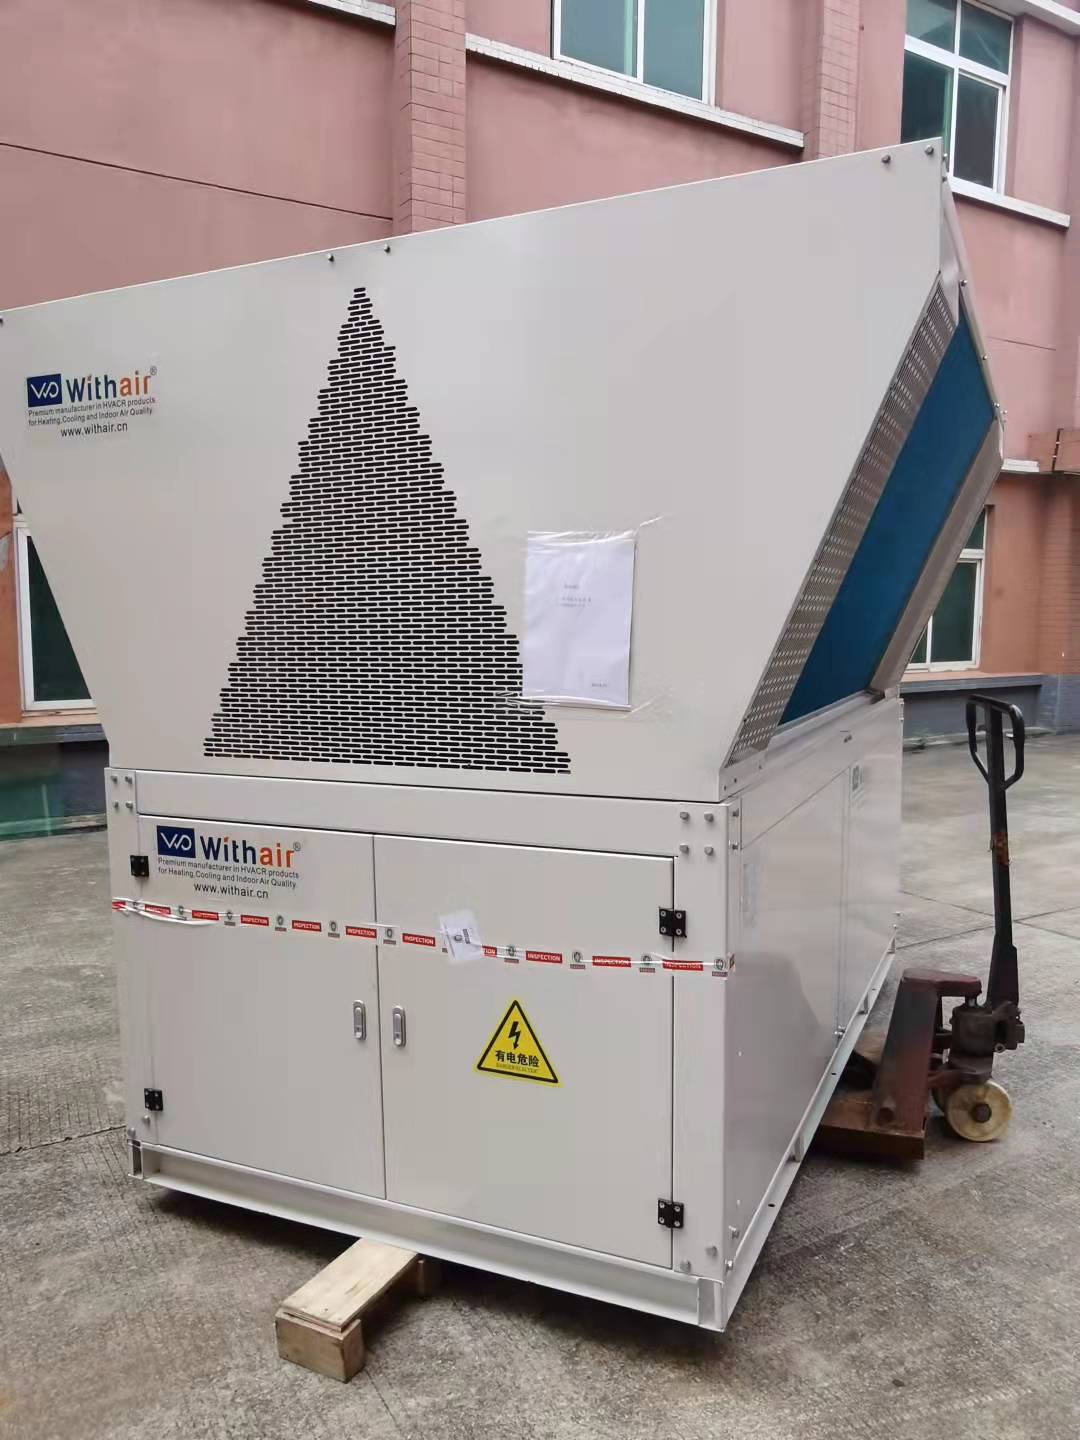 20Ton and 40Ton Industrial Use Air-cooled Scroll Chillers deliver to Indonesia's customer